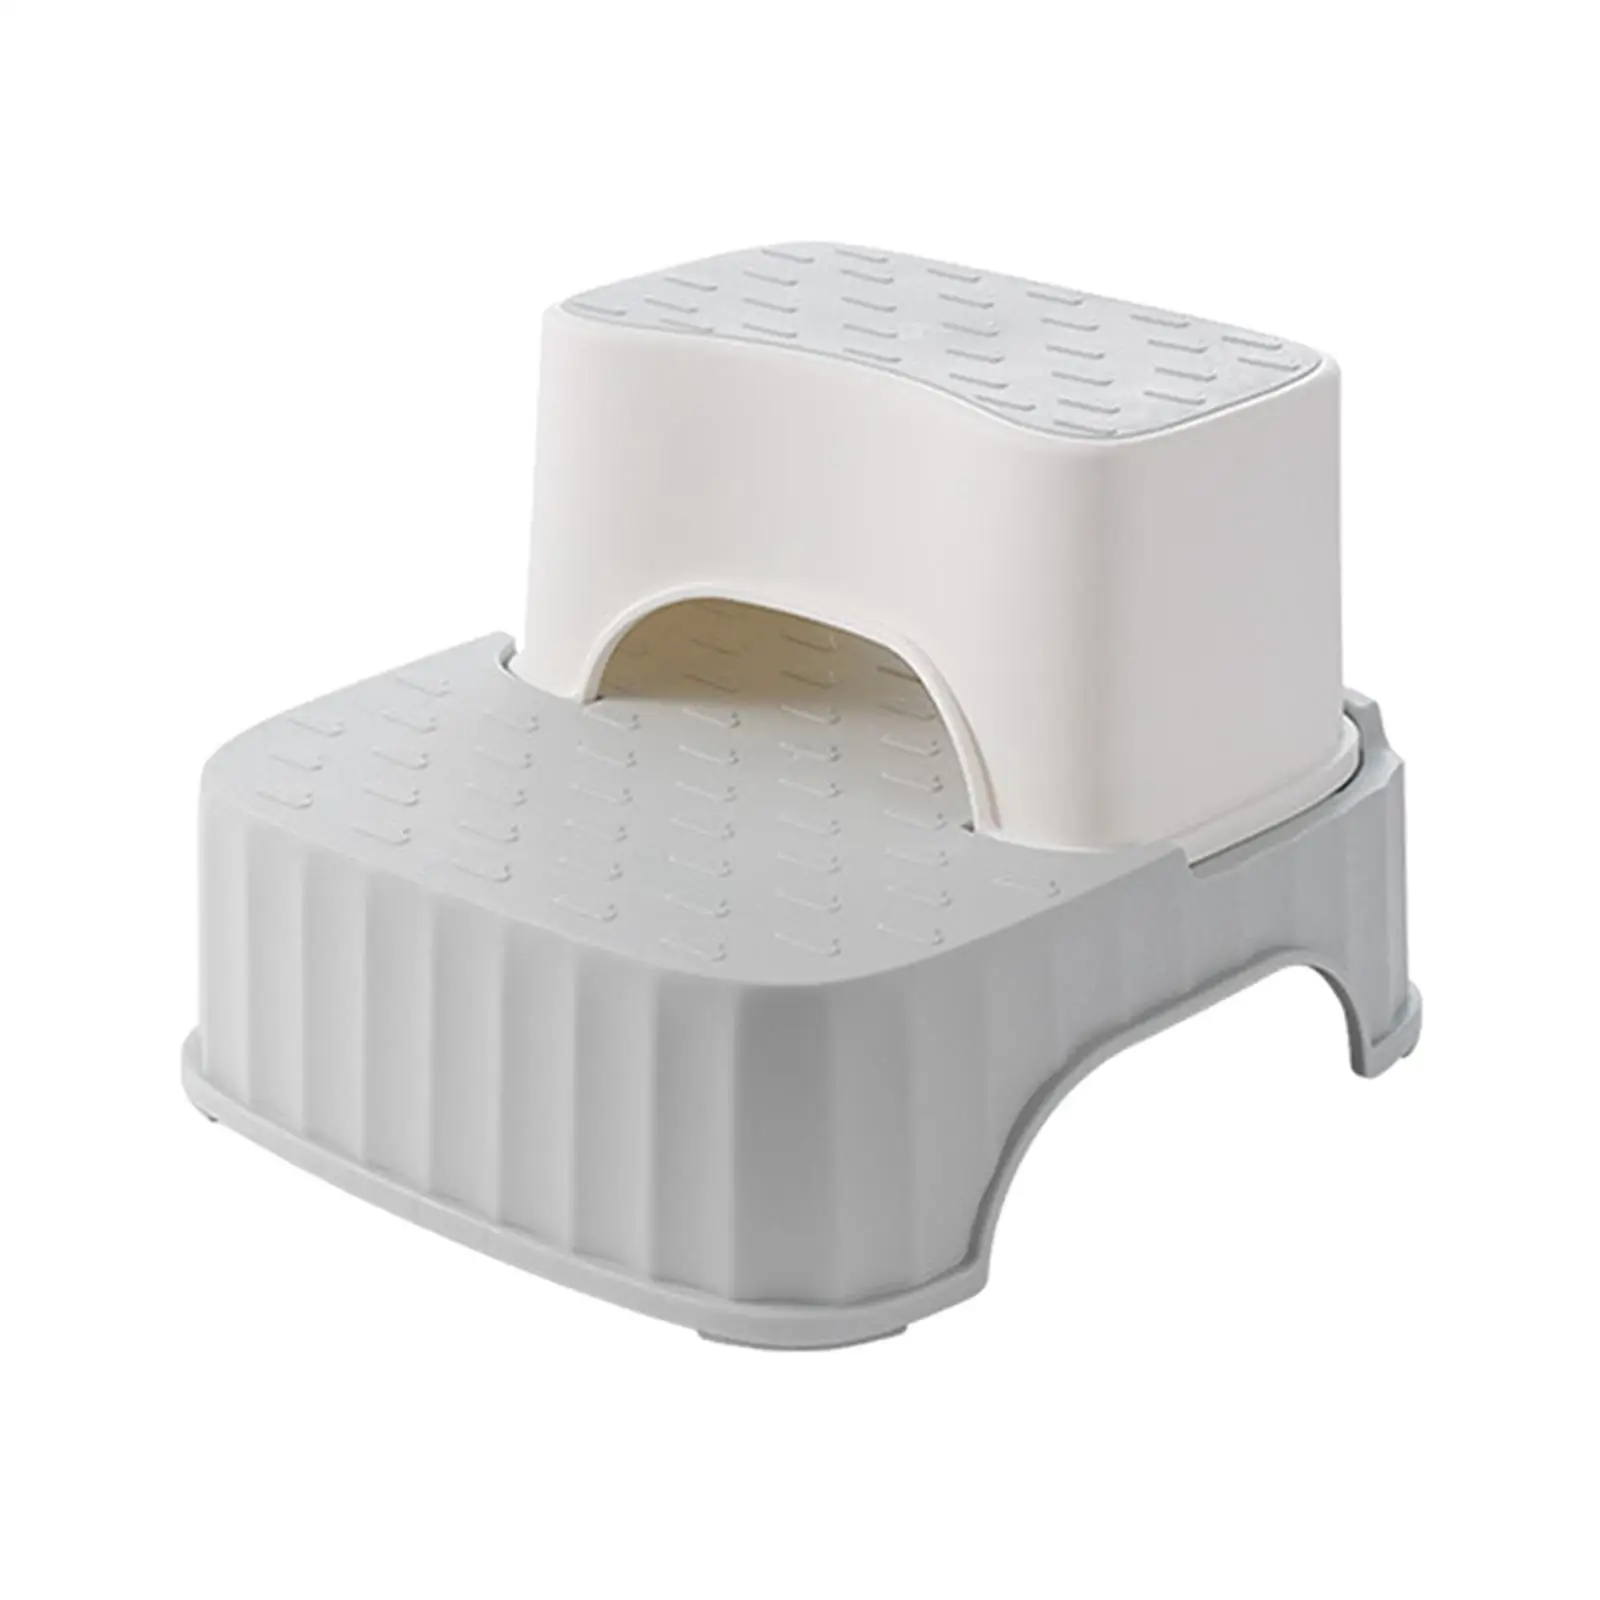 Portable Toilet Step Stool Toilet Step Stool Foot Rest Cushion Bedside Step Stool Foot Stool for Bathroom Home Gifts